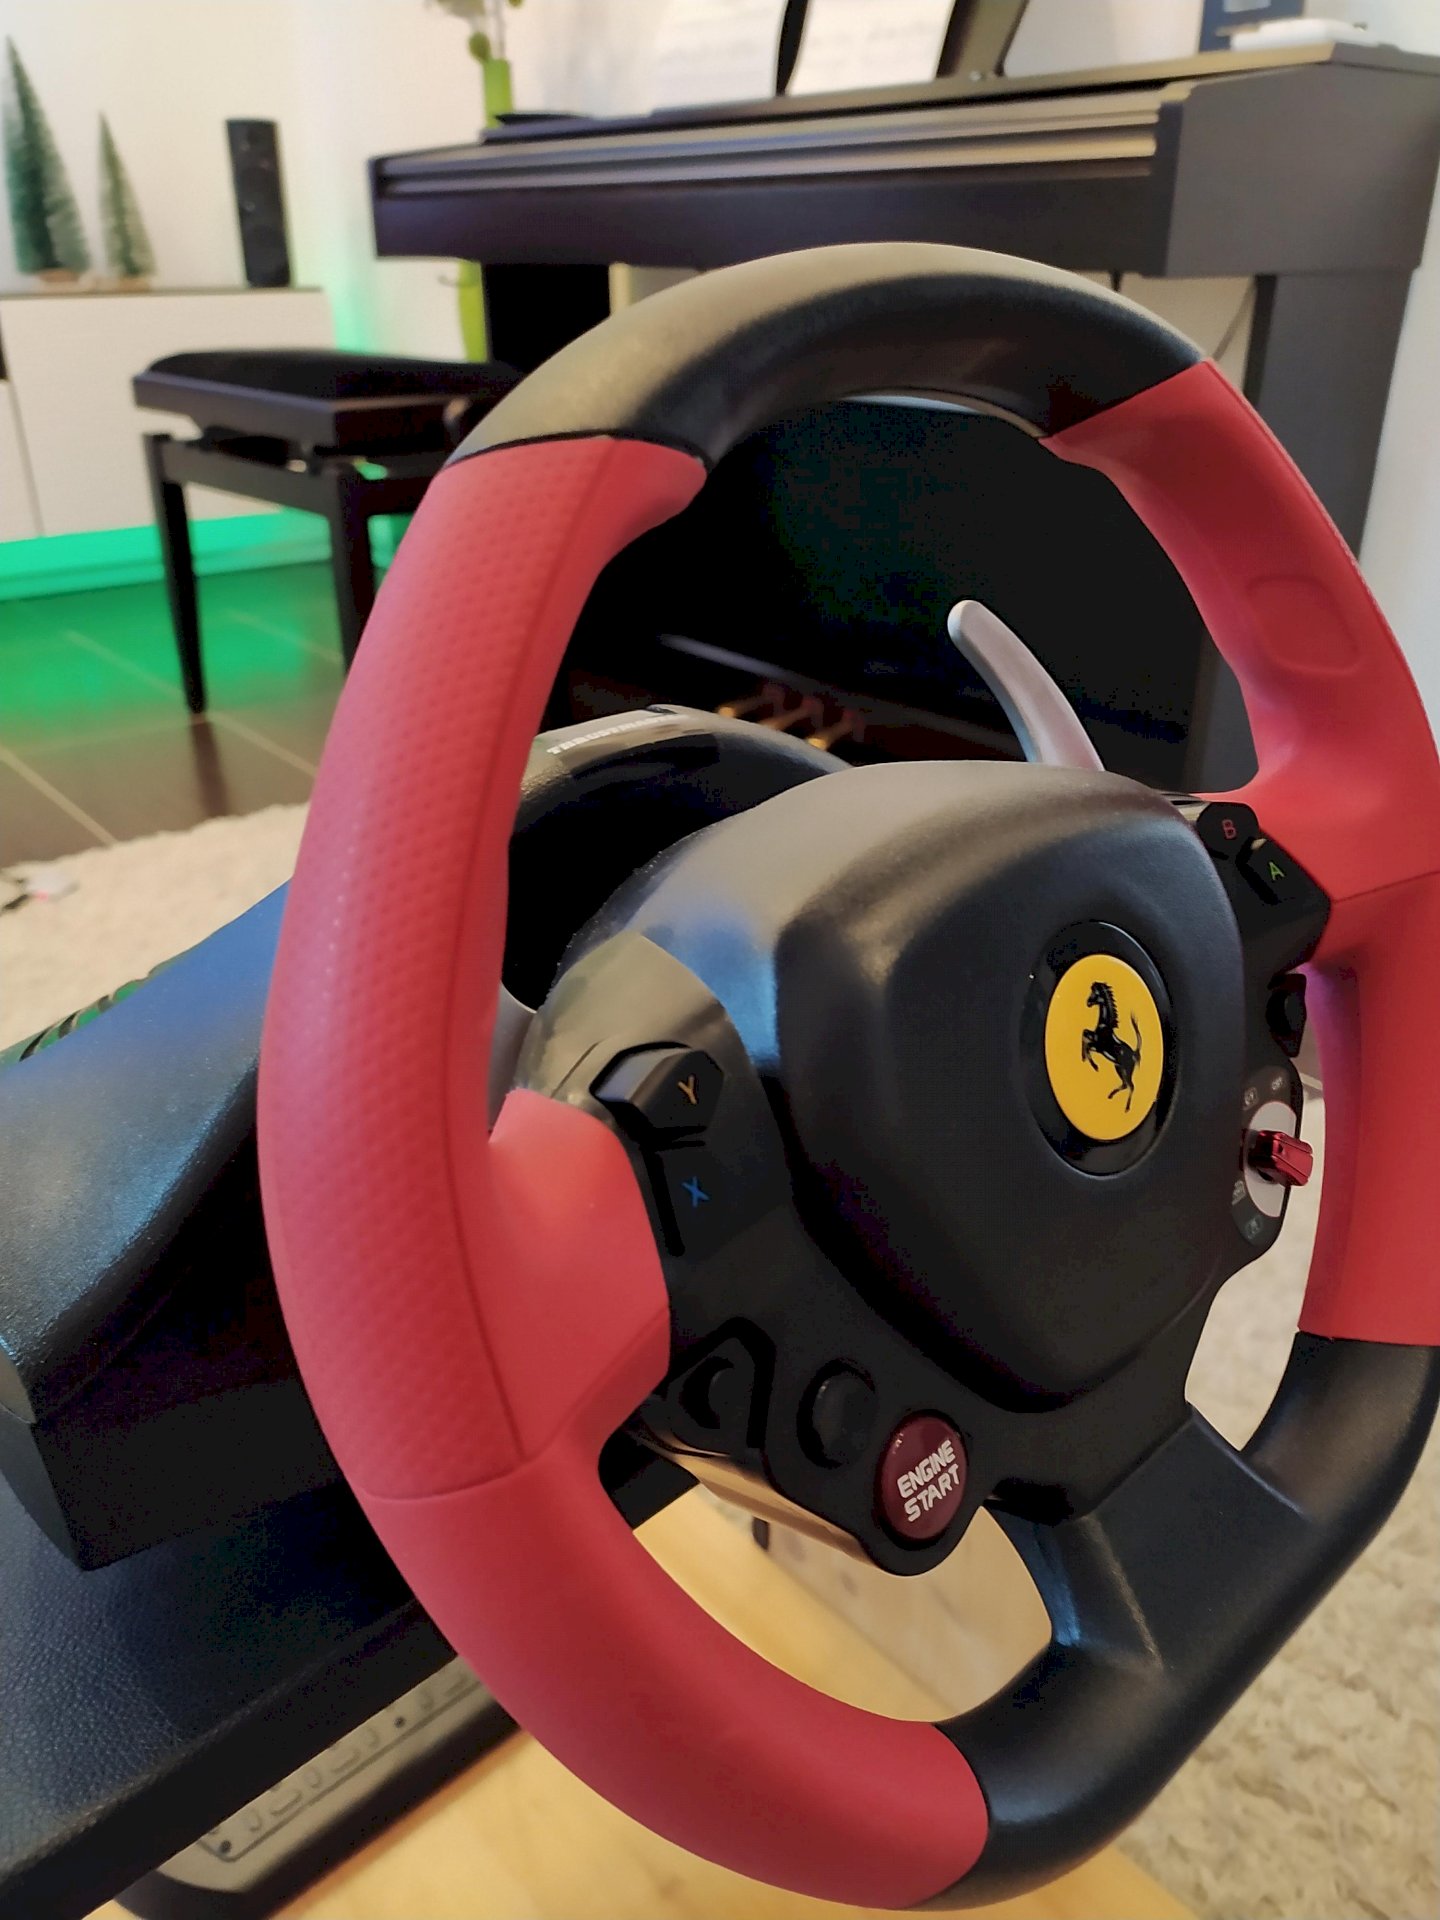 Thrustmaster steering wheel for xbox one reacts too late